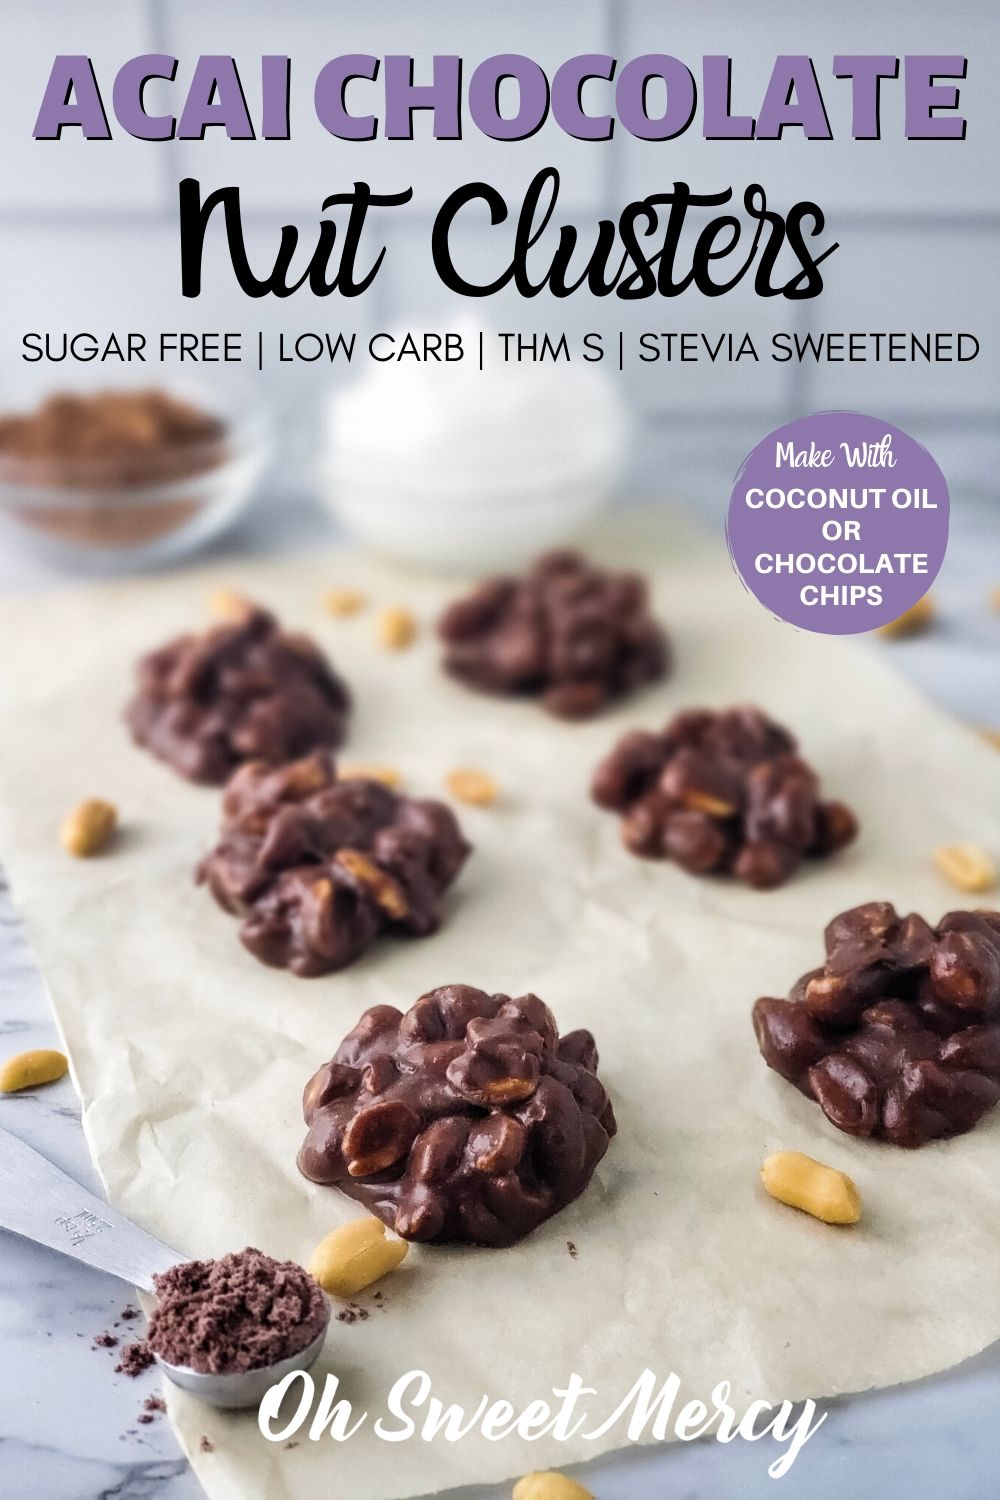 No need to give in to candy cravings with my Sugar Free Acai Chocolate Nut Clusters! Made with metabolism-boosting coconut oil and sweetened with stevia, they're the perfect THM S, low carb, or keto chocolate peanut treat you've been looking for. Also includes directions for store-bought stevia sweetened chocolate chips. #thm #lowcarb #sugarfree #keto #acai #candy #recipes 